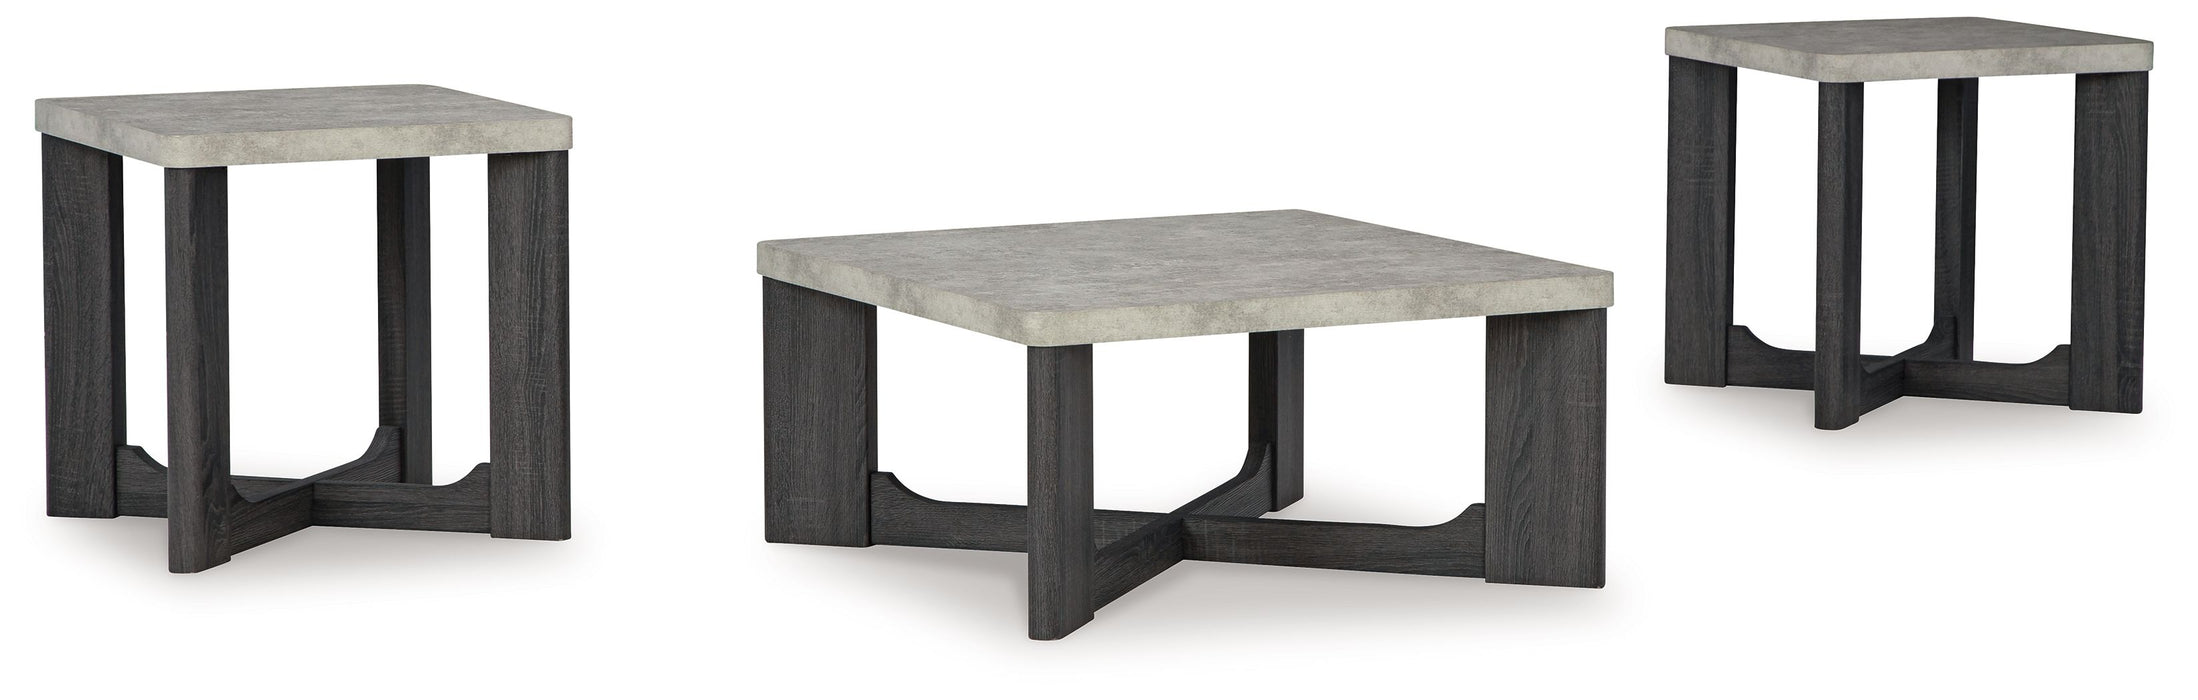 Sharstorm - Two-tone Gray - Occasional Table Set (Set of 3)